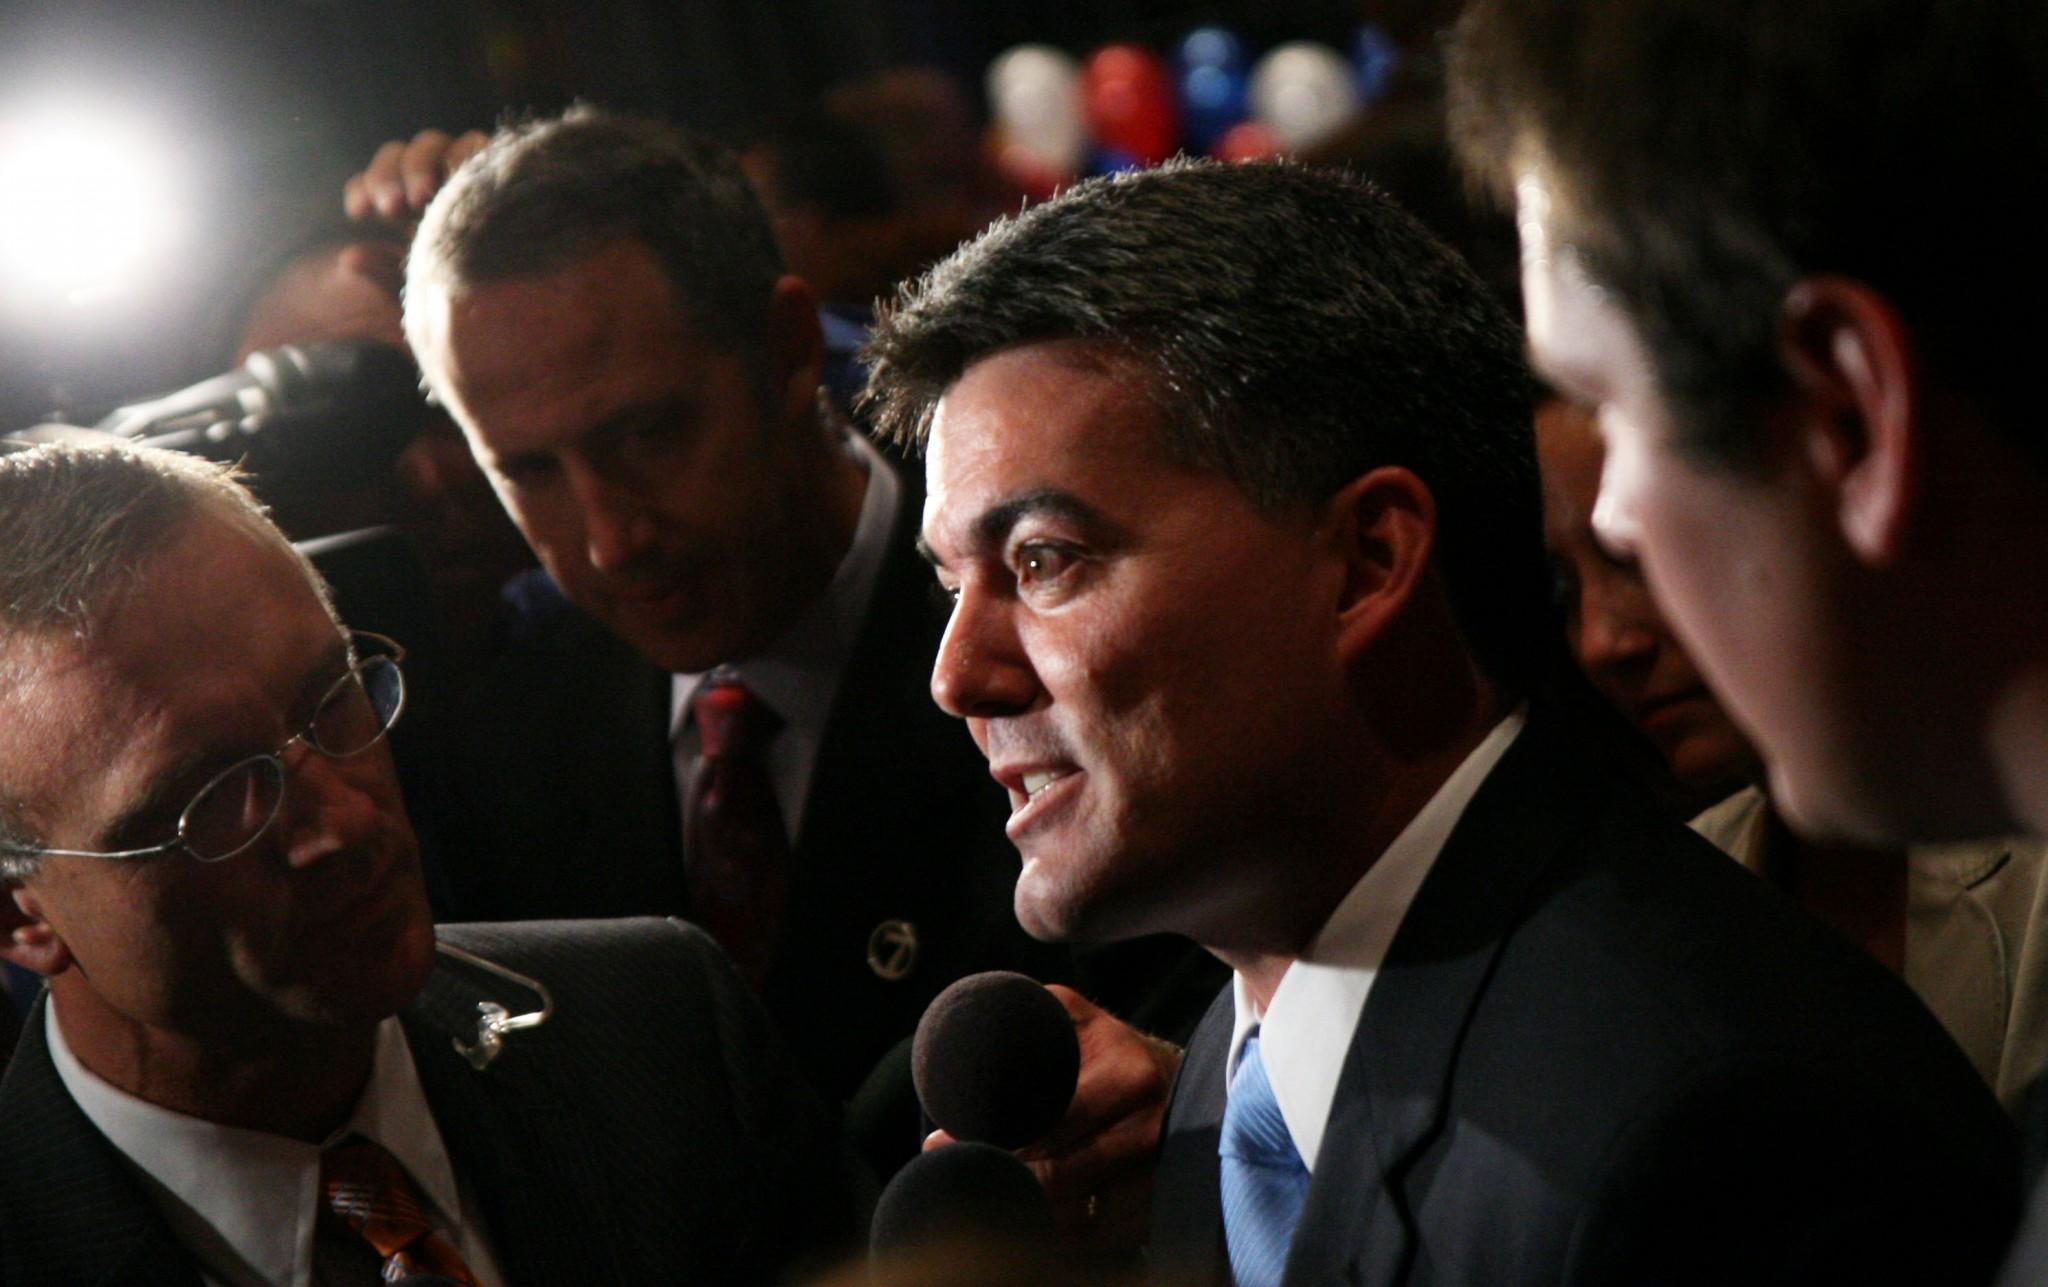 Cory Gardner talks with reporters after being elected to the U.S. Congress Tuesday night. Gardner edged out Betsy Markey for the position.